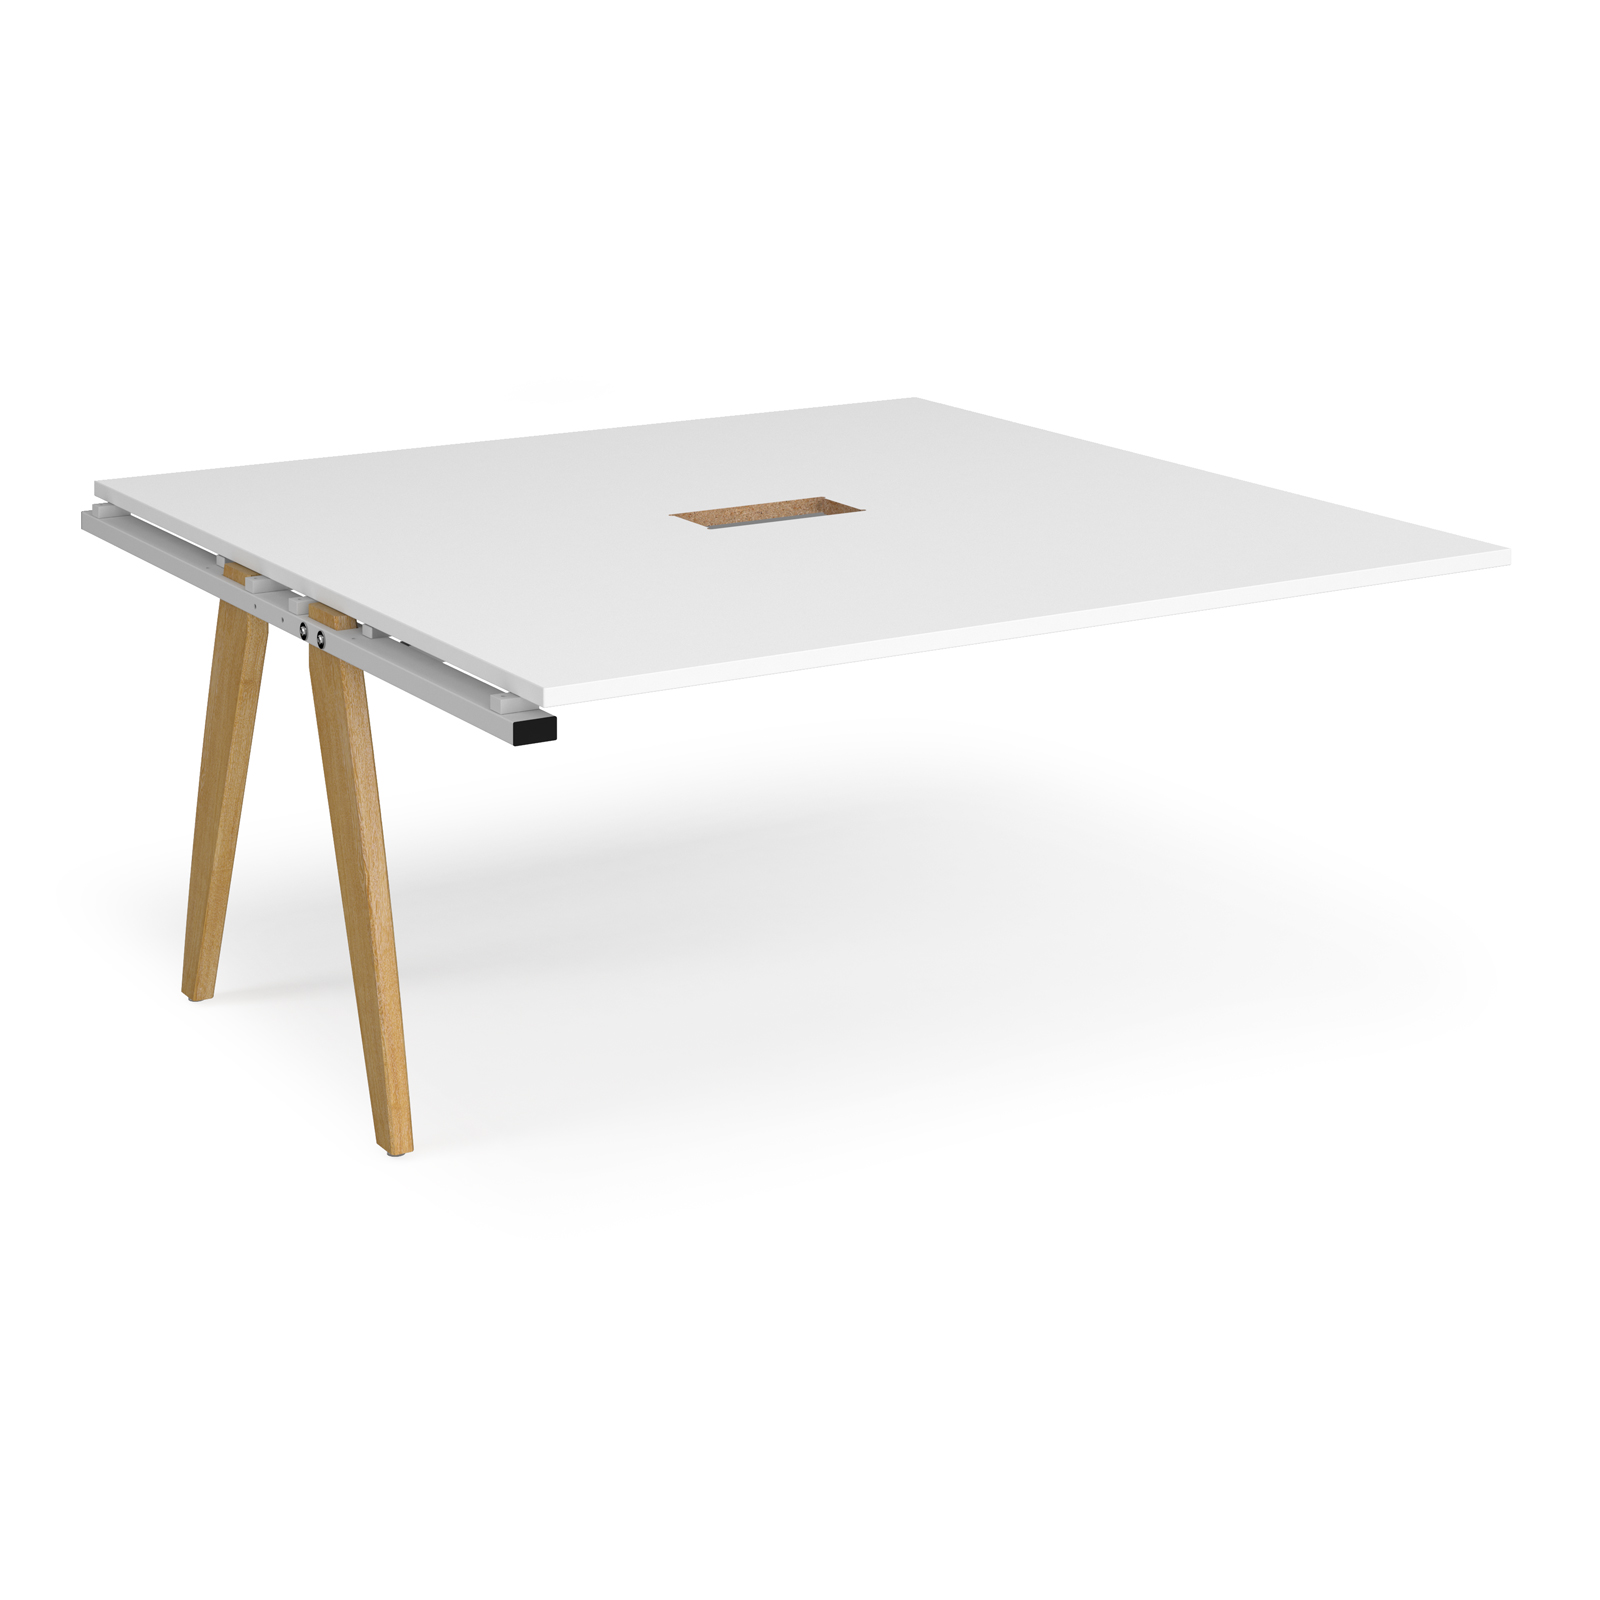 Fuze boardroom table add on unit 1600mm x 1600mm with central cutout 272mm x 132mm - white frame, white top